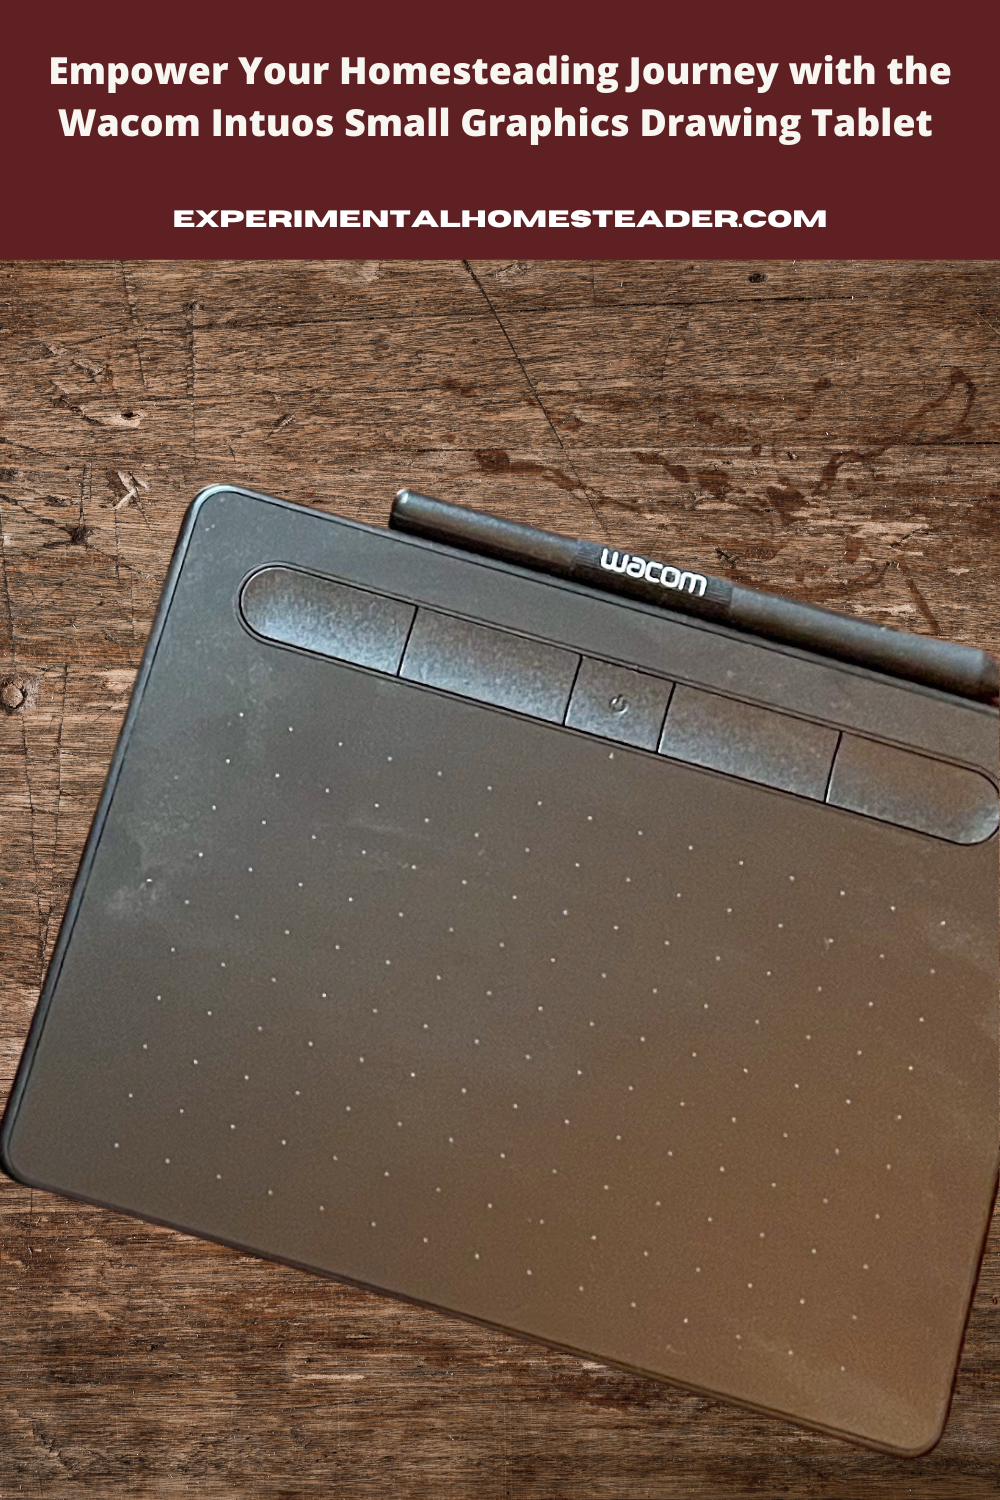 An image of the Wacom Intuos Small Graphics Drawing Tablet